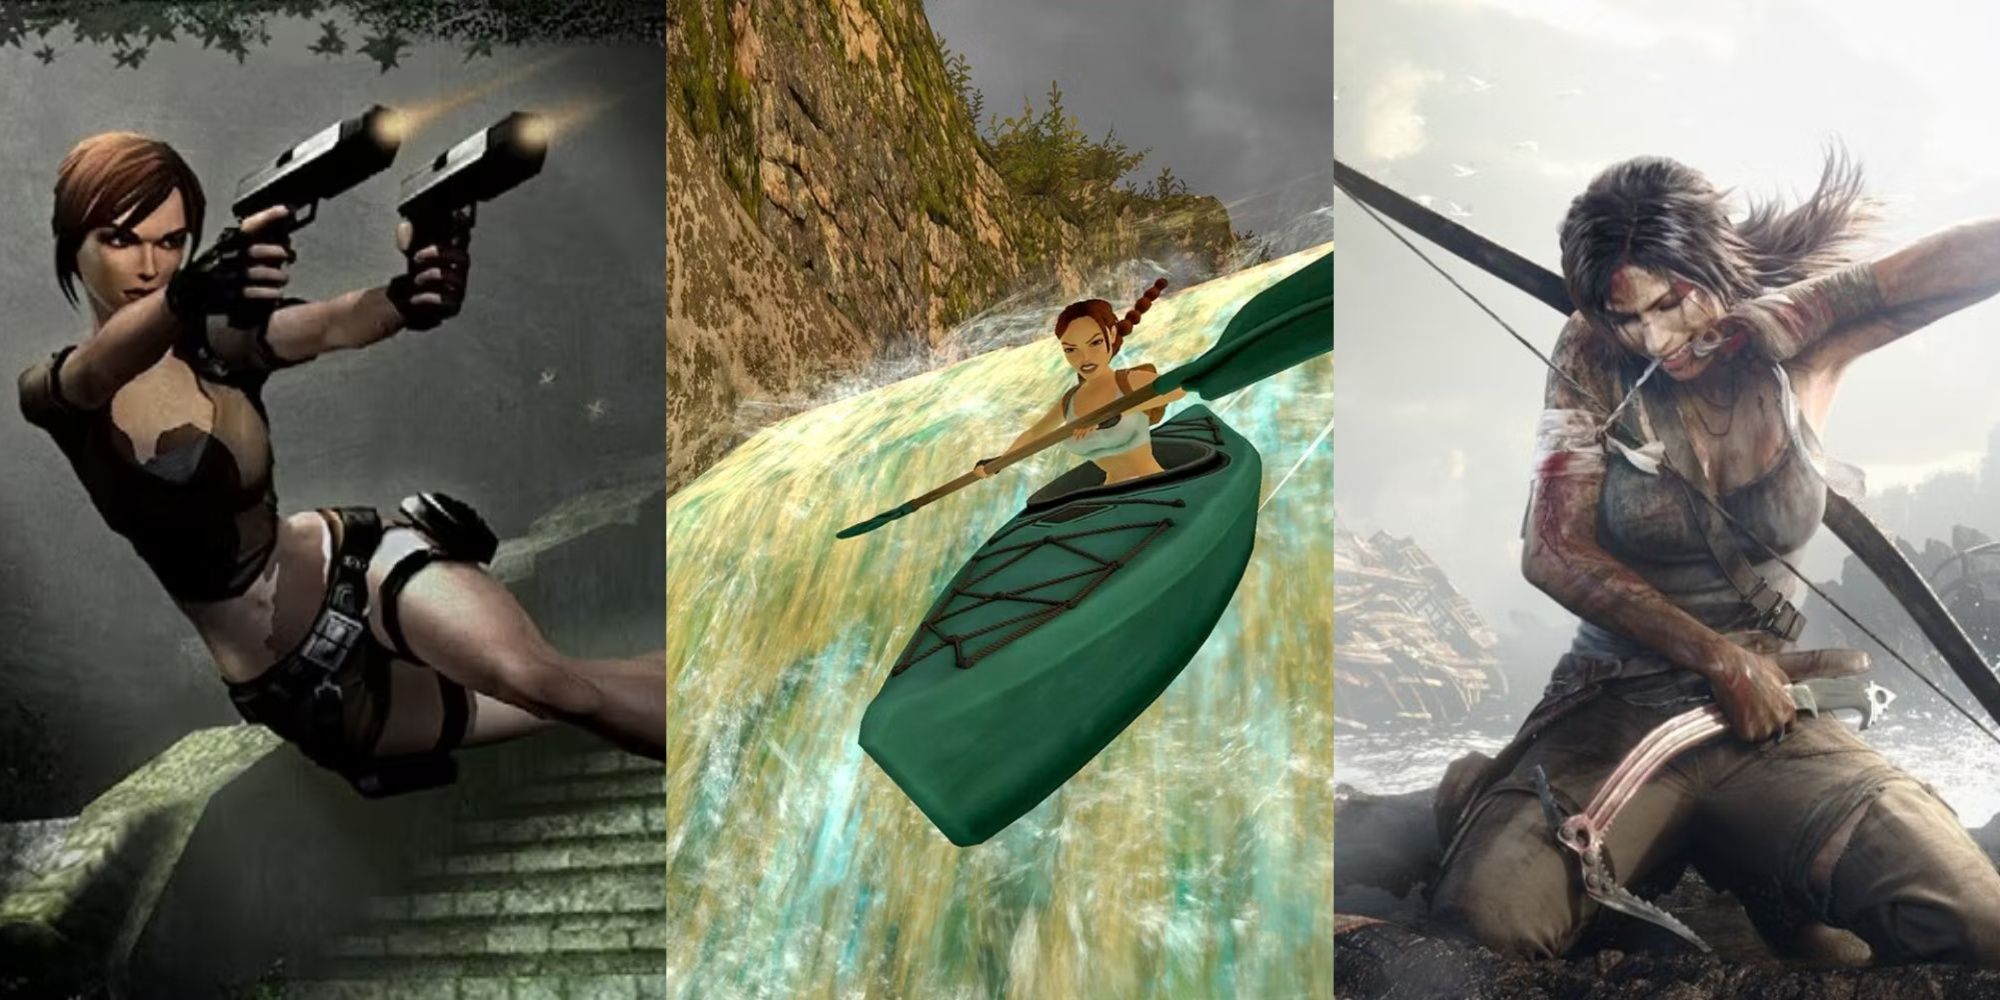 Lara firing her dual pistols while diving, Lara rowing a canoe down a waterfall, and Lara tying a bandage around her arm in Tomb Raider reboot, left to right